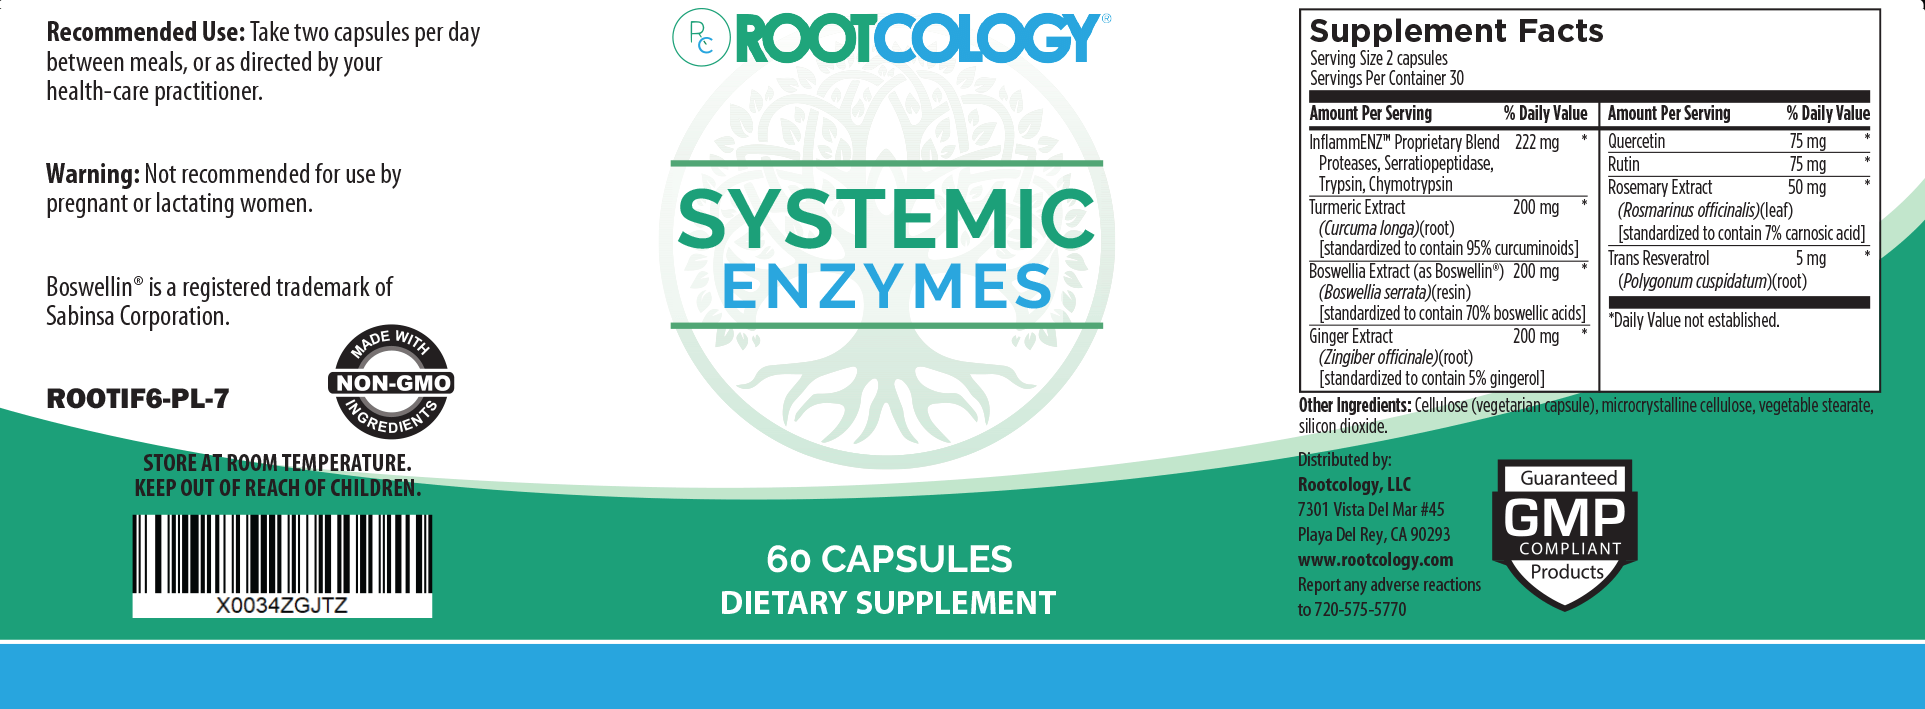 Rootcology Systemic Enzymes Supplement Label